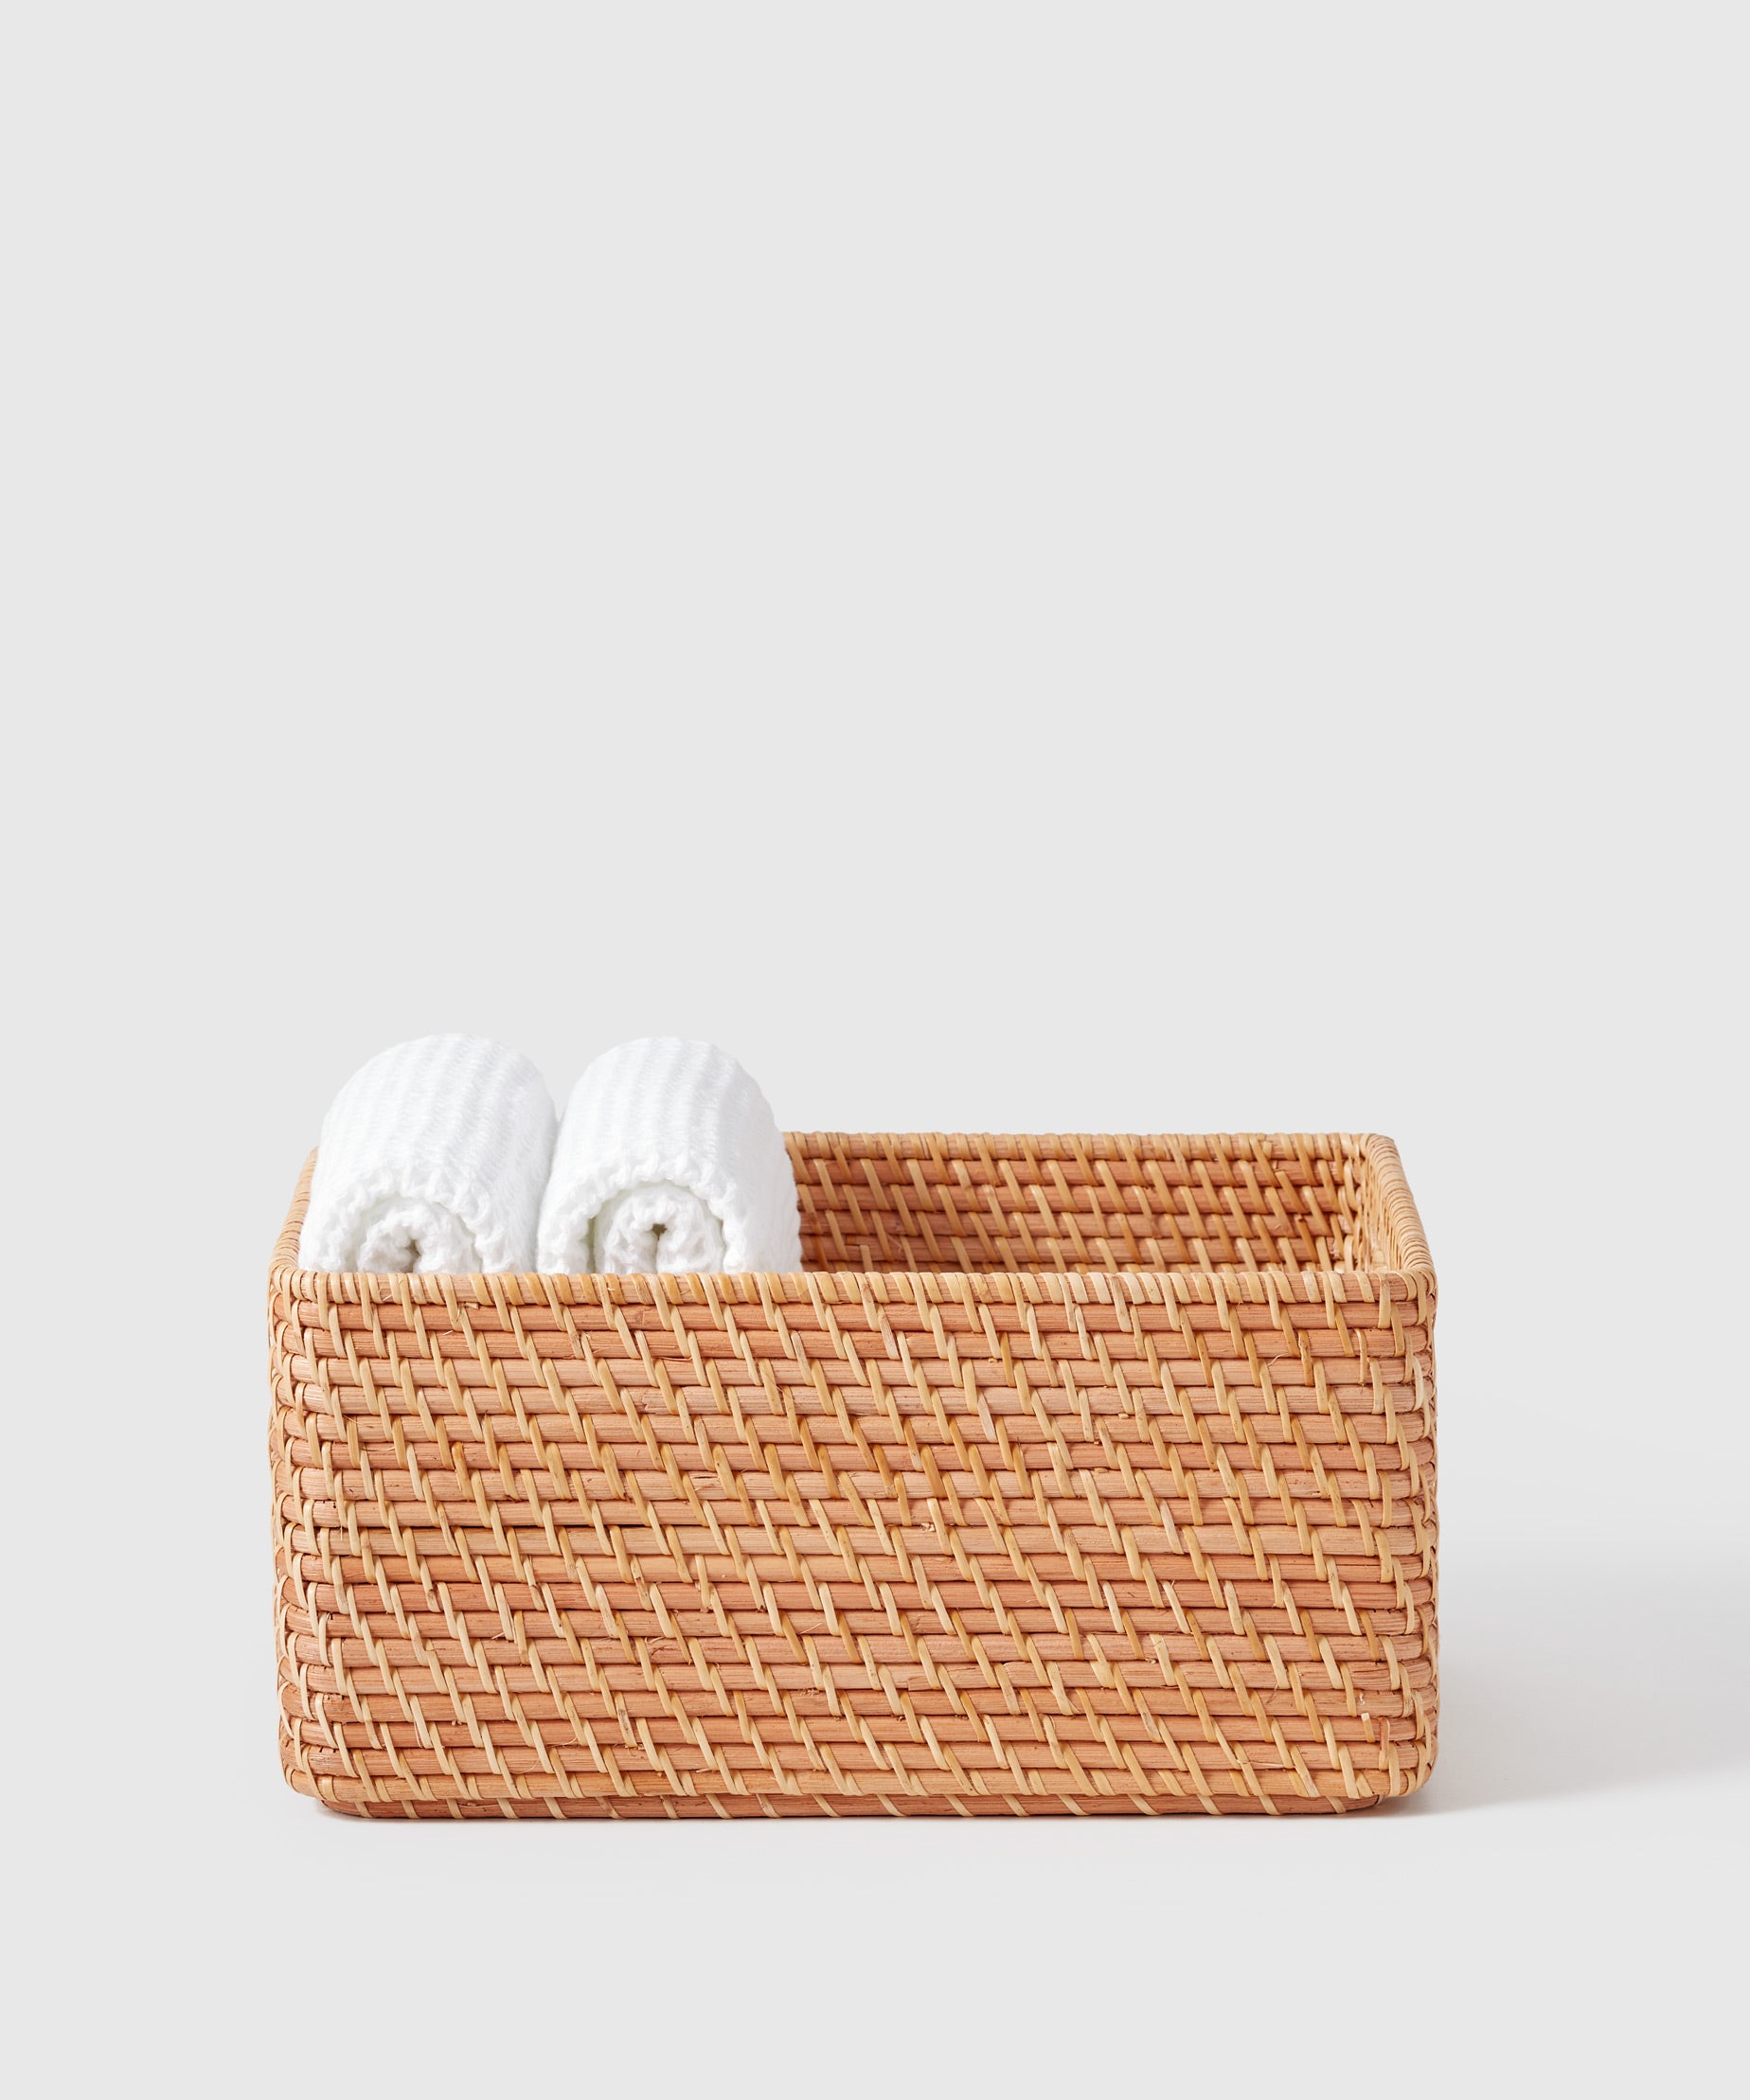 Large Woven Rattan Bin With Handles | Marie Kondo Official Site